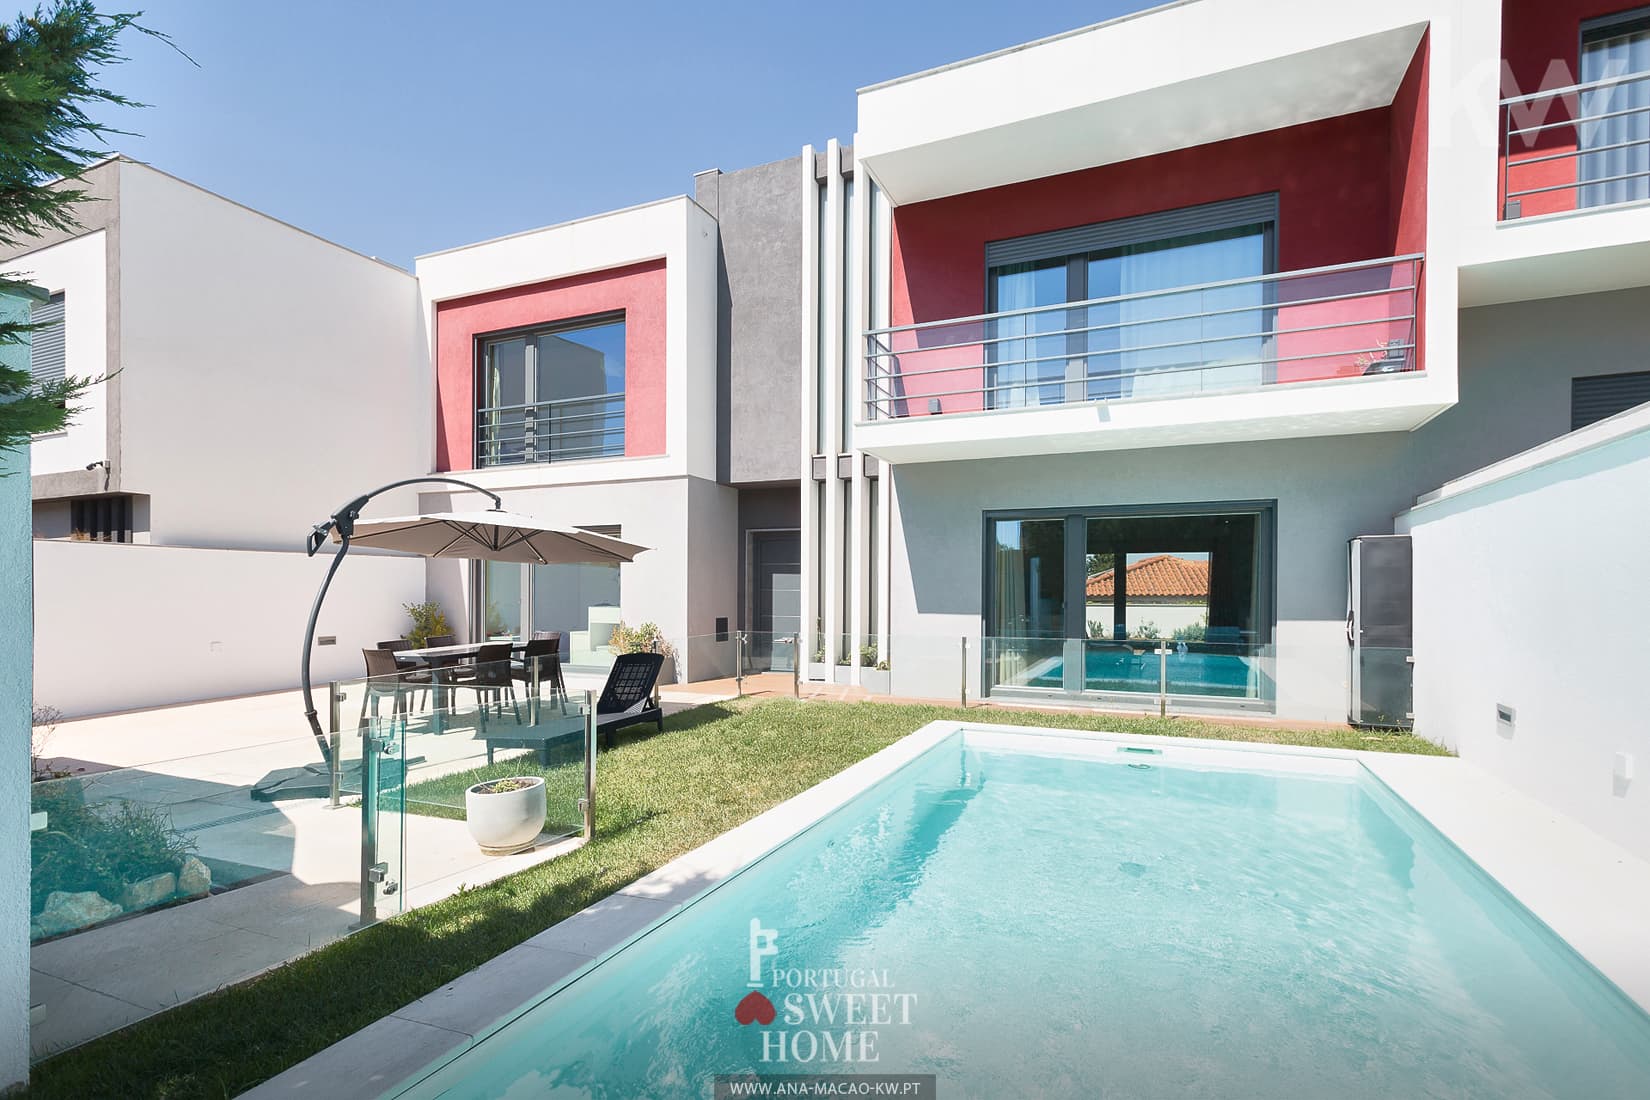 Spectacular 5 bedroom villa with heated pool and luxury finishes